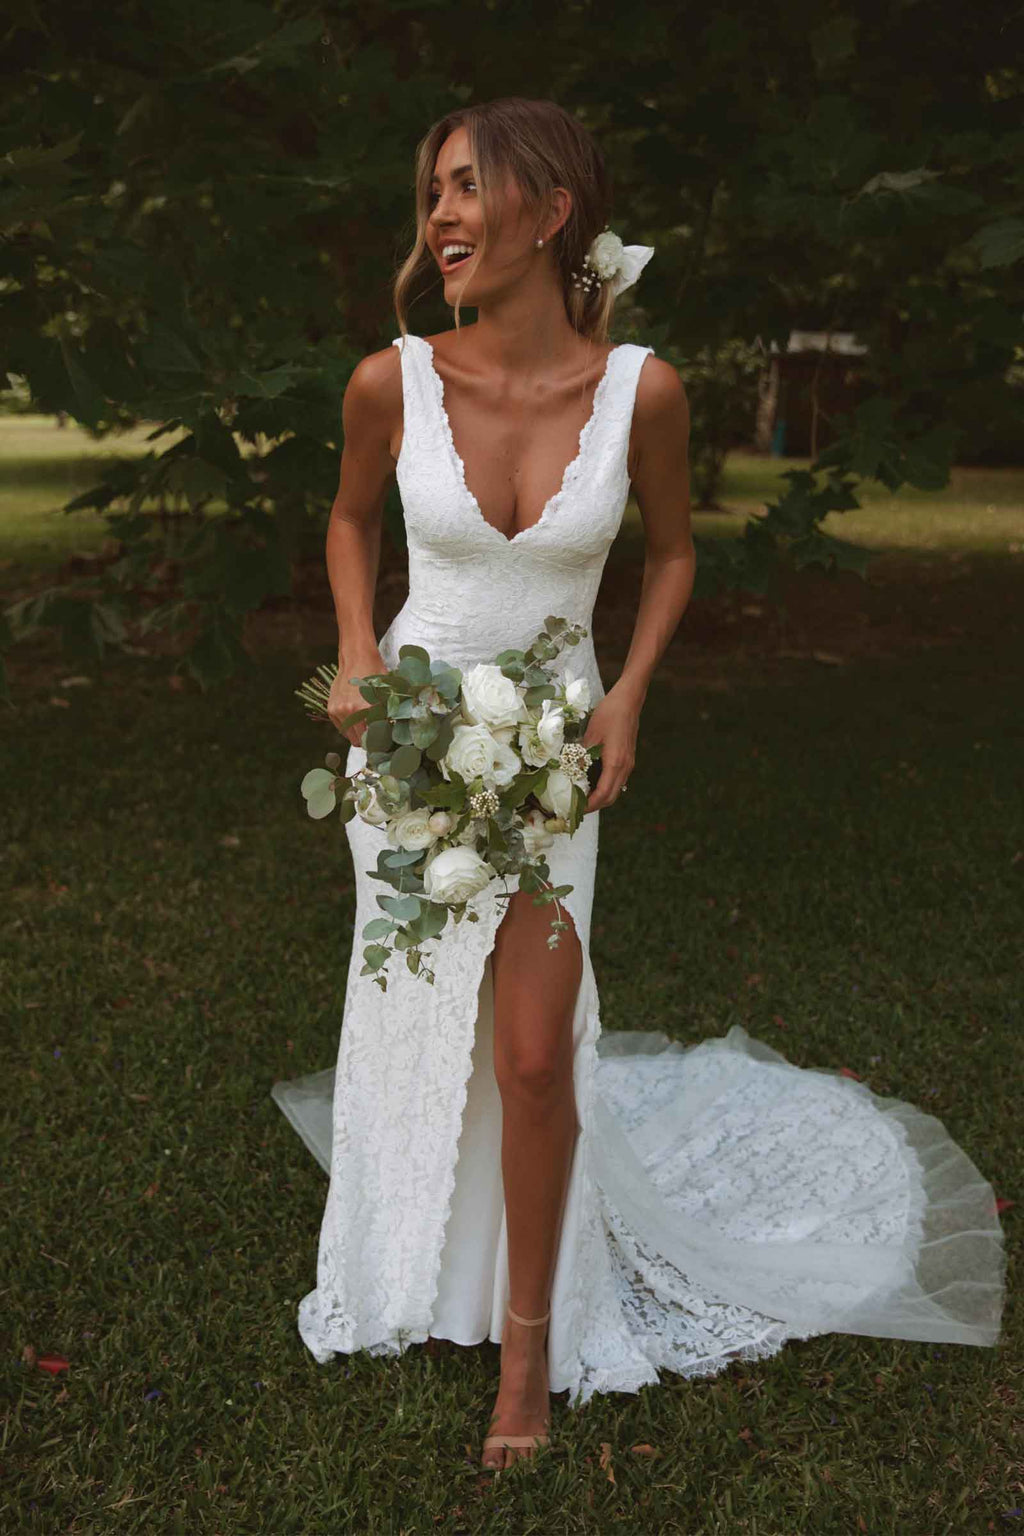 White Casual Wedding Dress A-Line Square Neck Long Sleeves Backless  Applique Cut-Outs Split Front Long Bridal Gowns – Dbrbridal